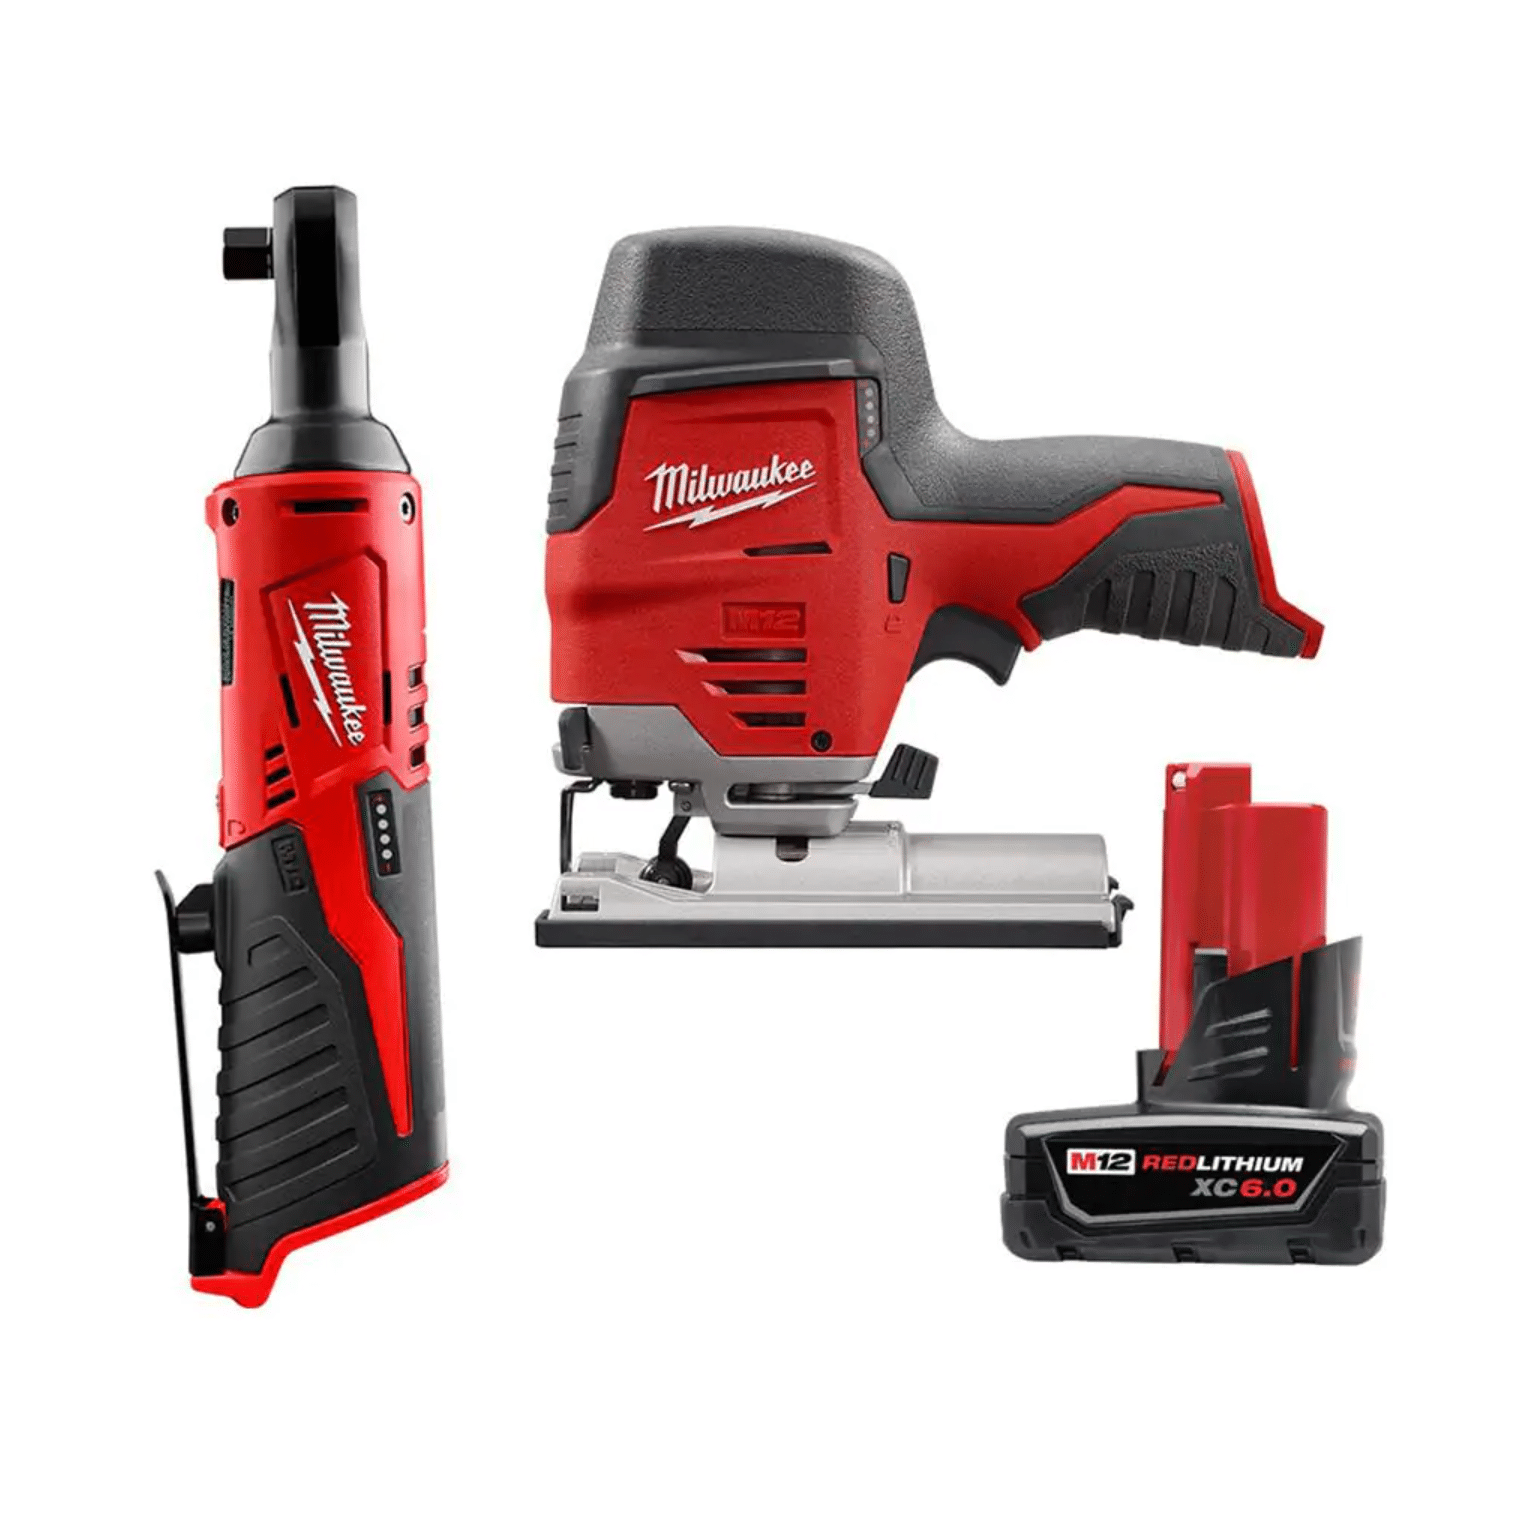 Milwaukee M12 12V Lithium-Ion Cordless Jig Saw with M12 3/8 in. Ratchet & 6.0 Ah XC Battery Pack (2445-20-2457-20-48-11-2460)